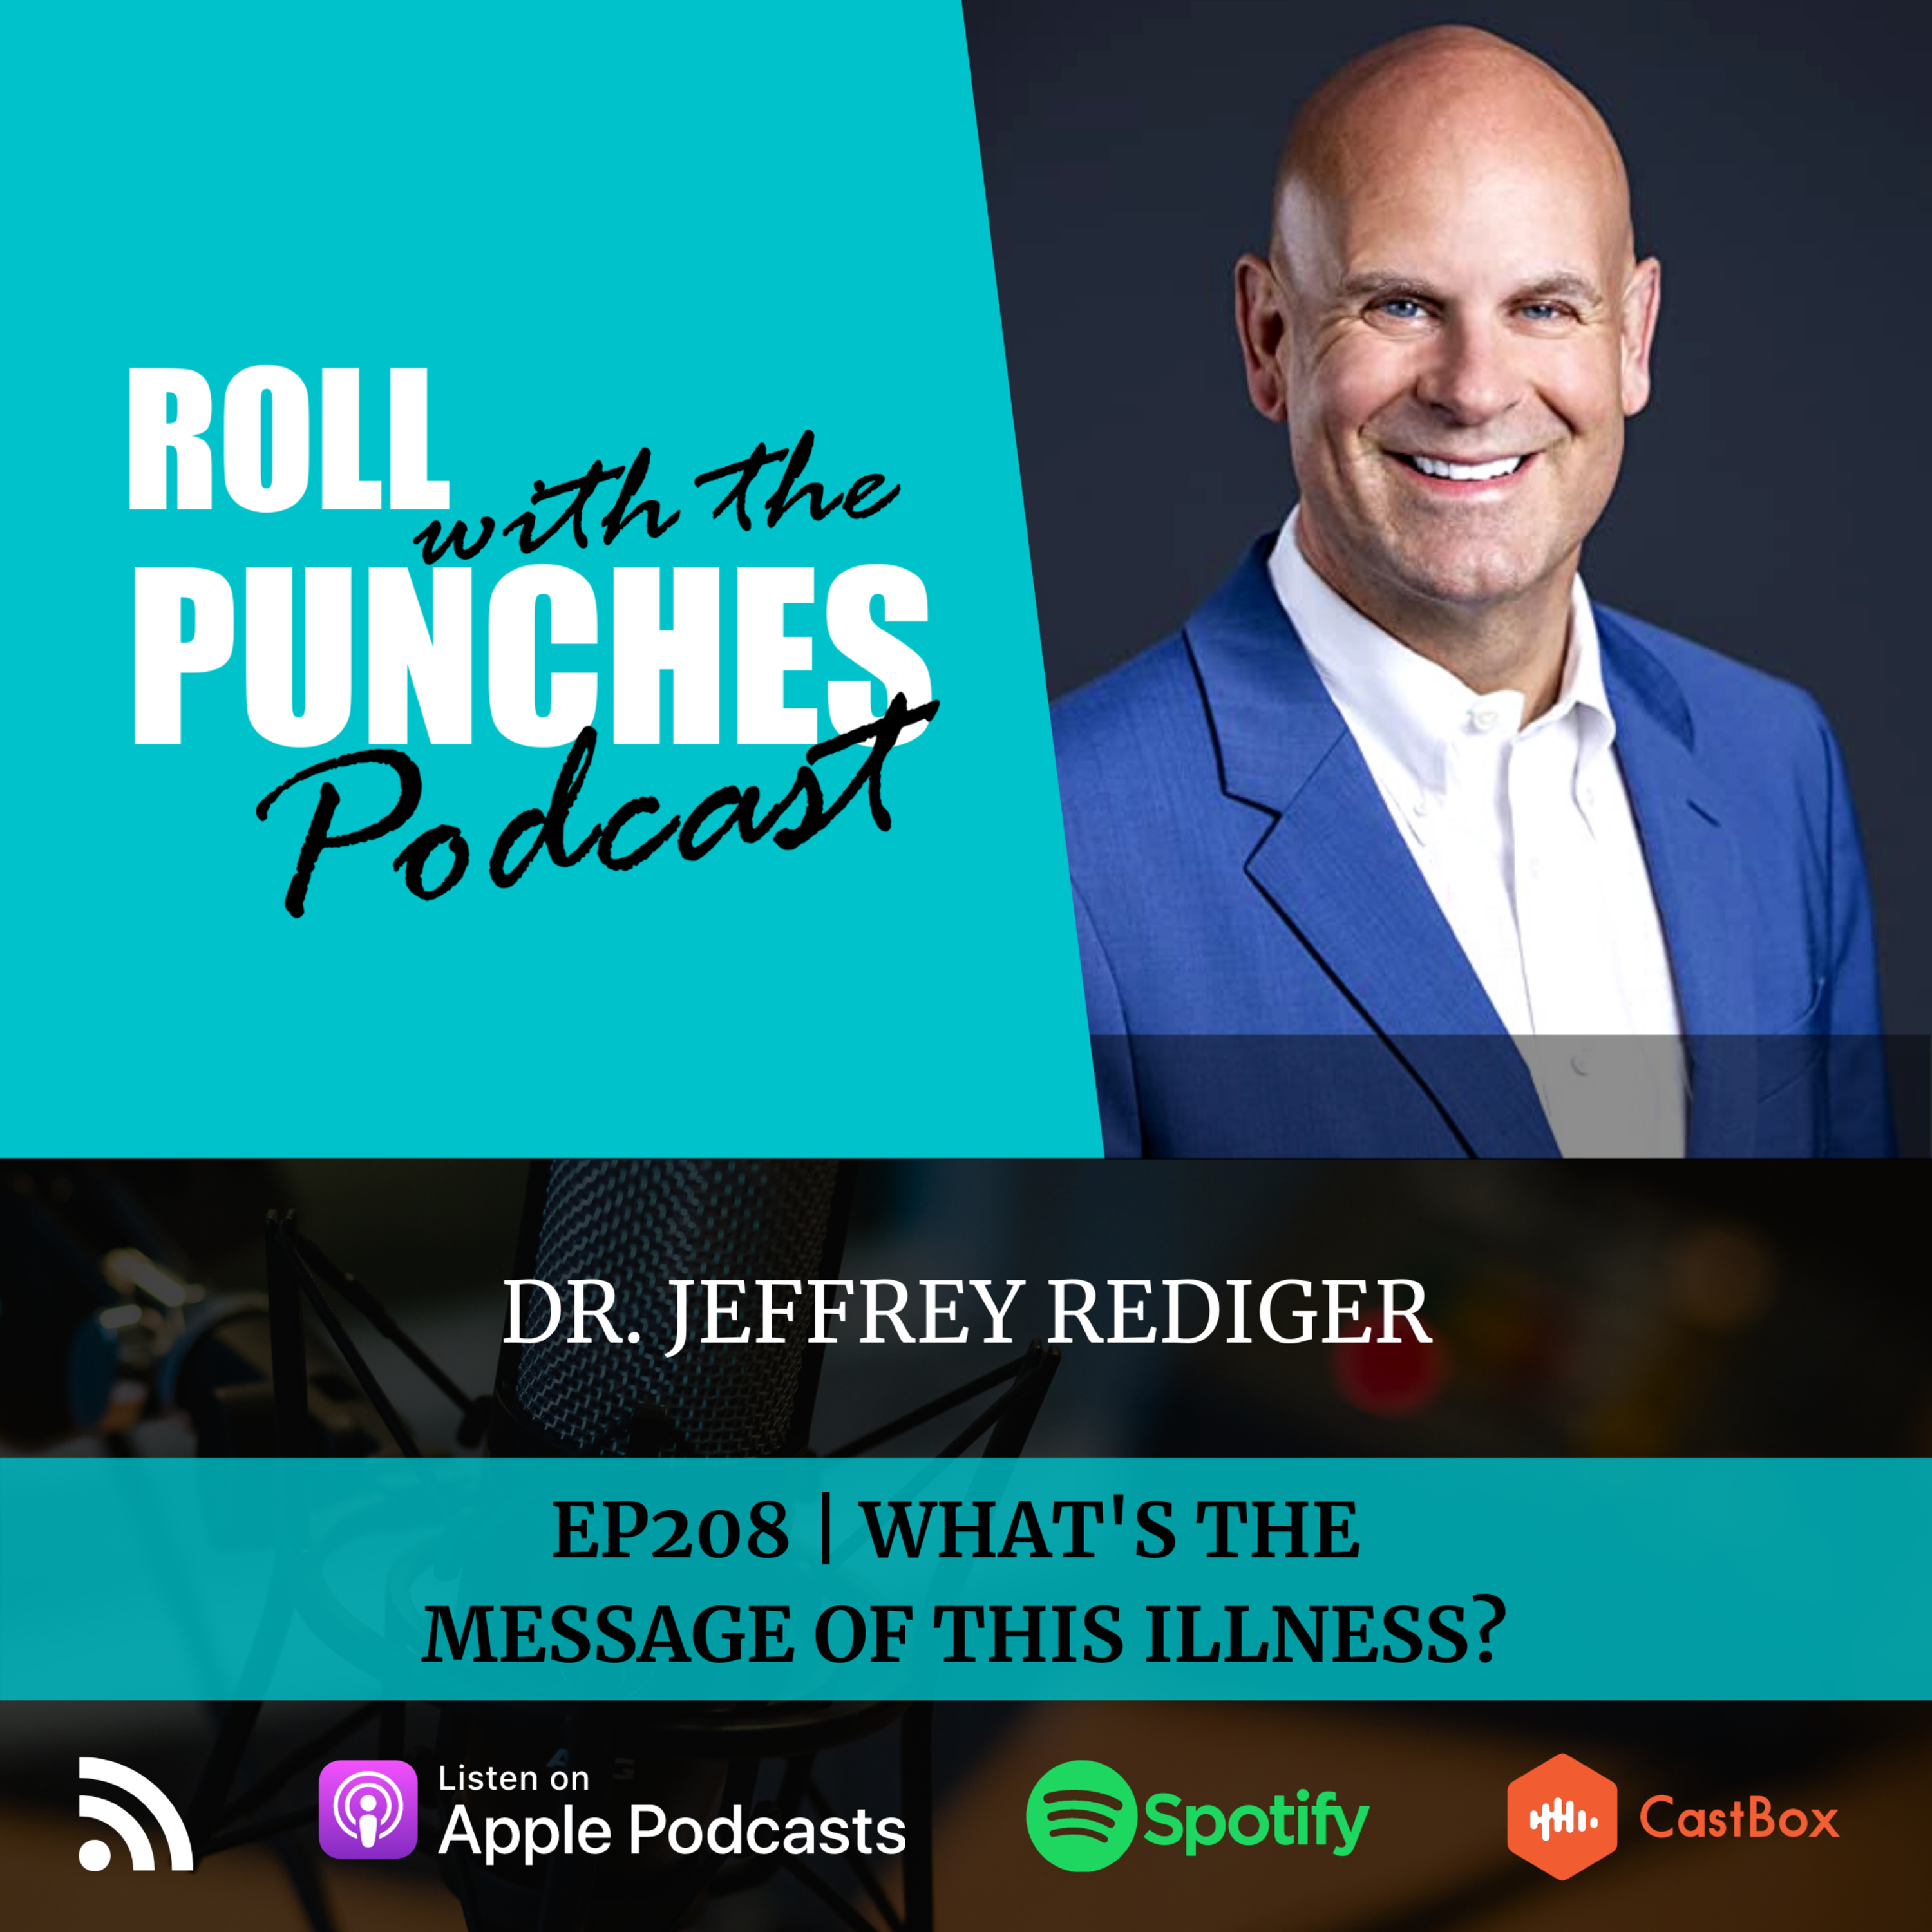 EP208 What's The Message Of This Illness? | Dr Jeffrey Rediger